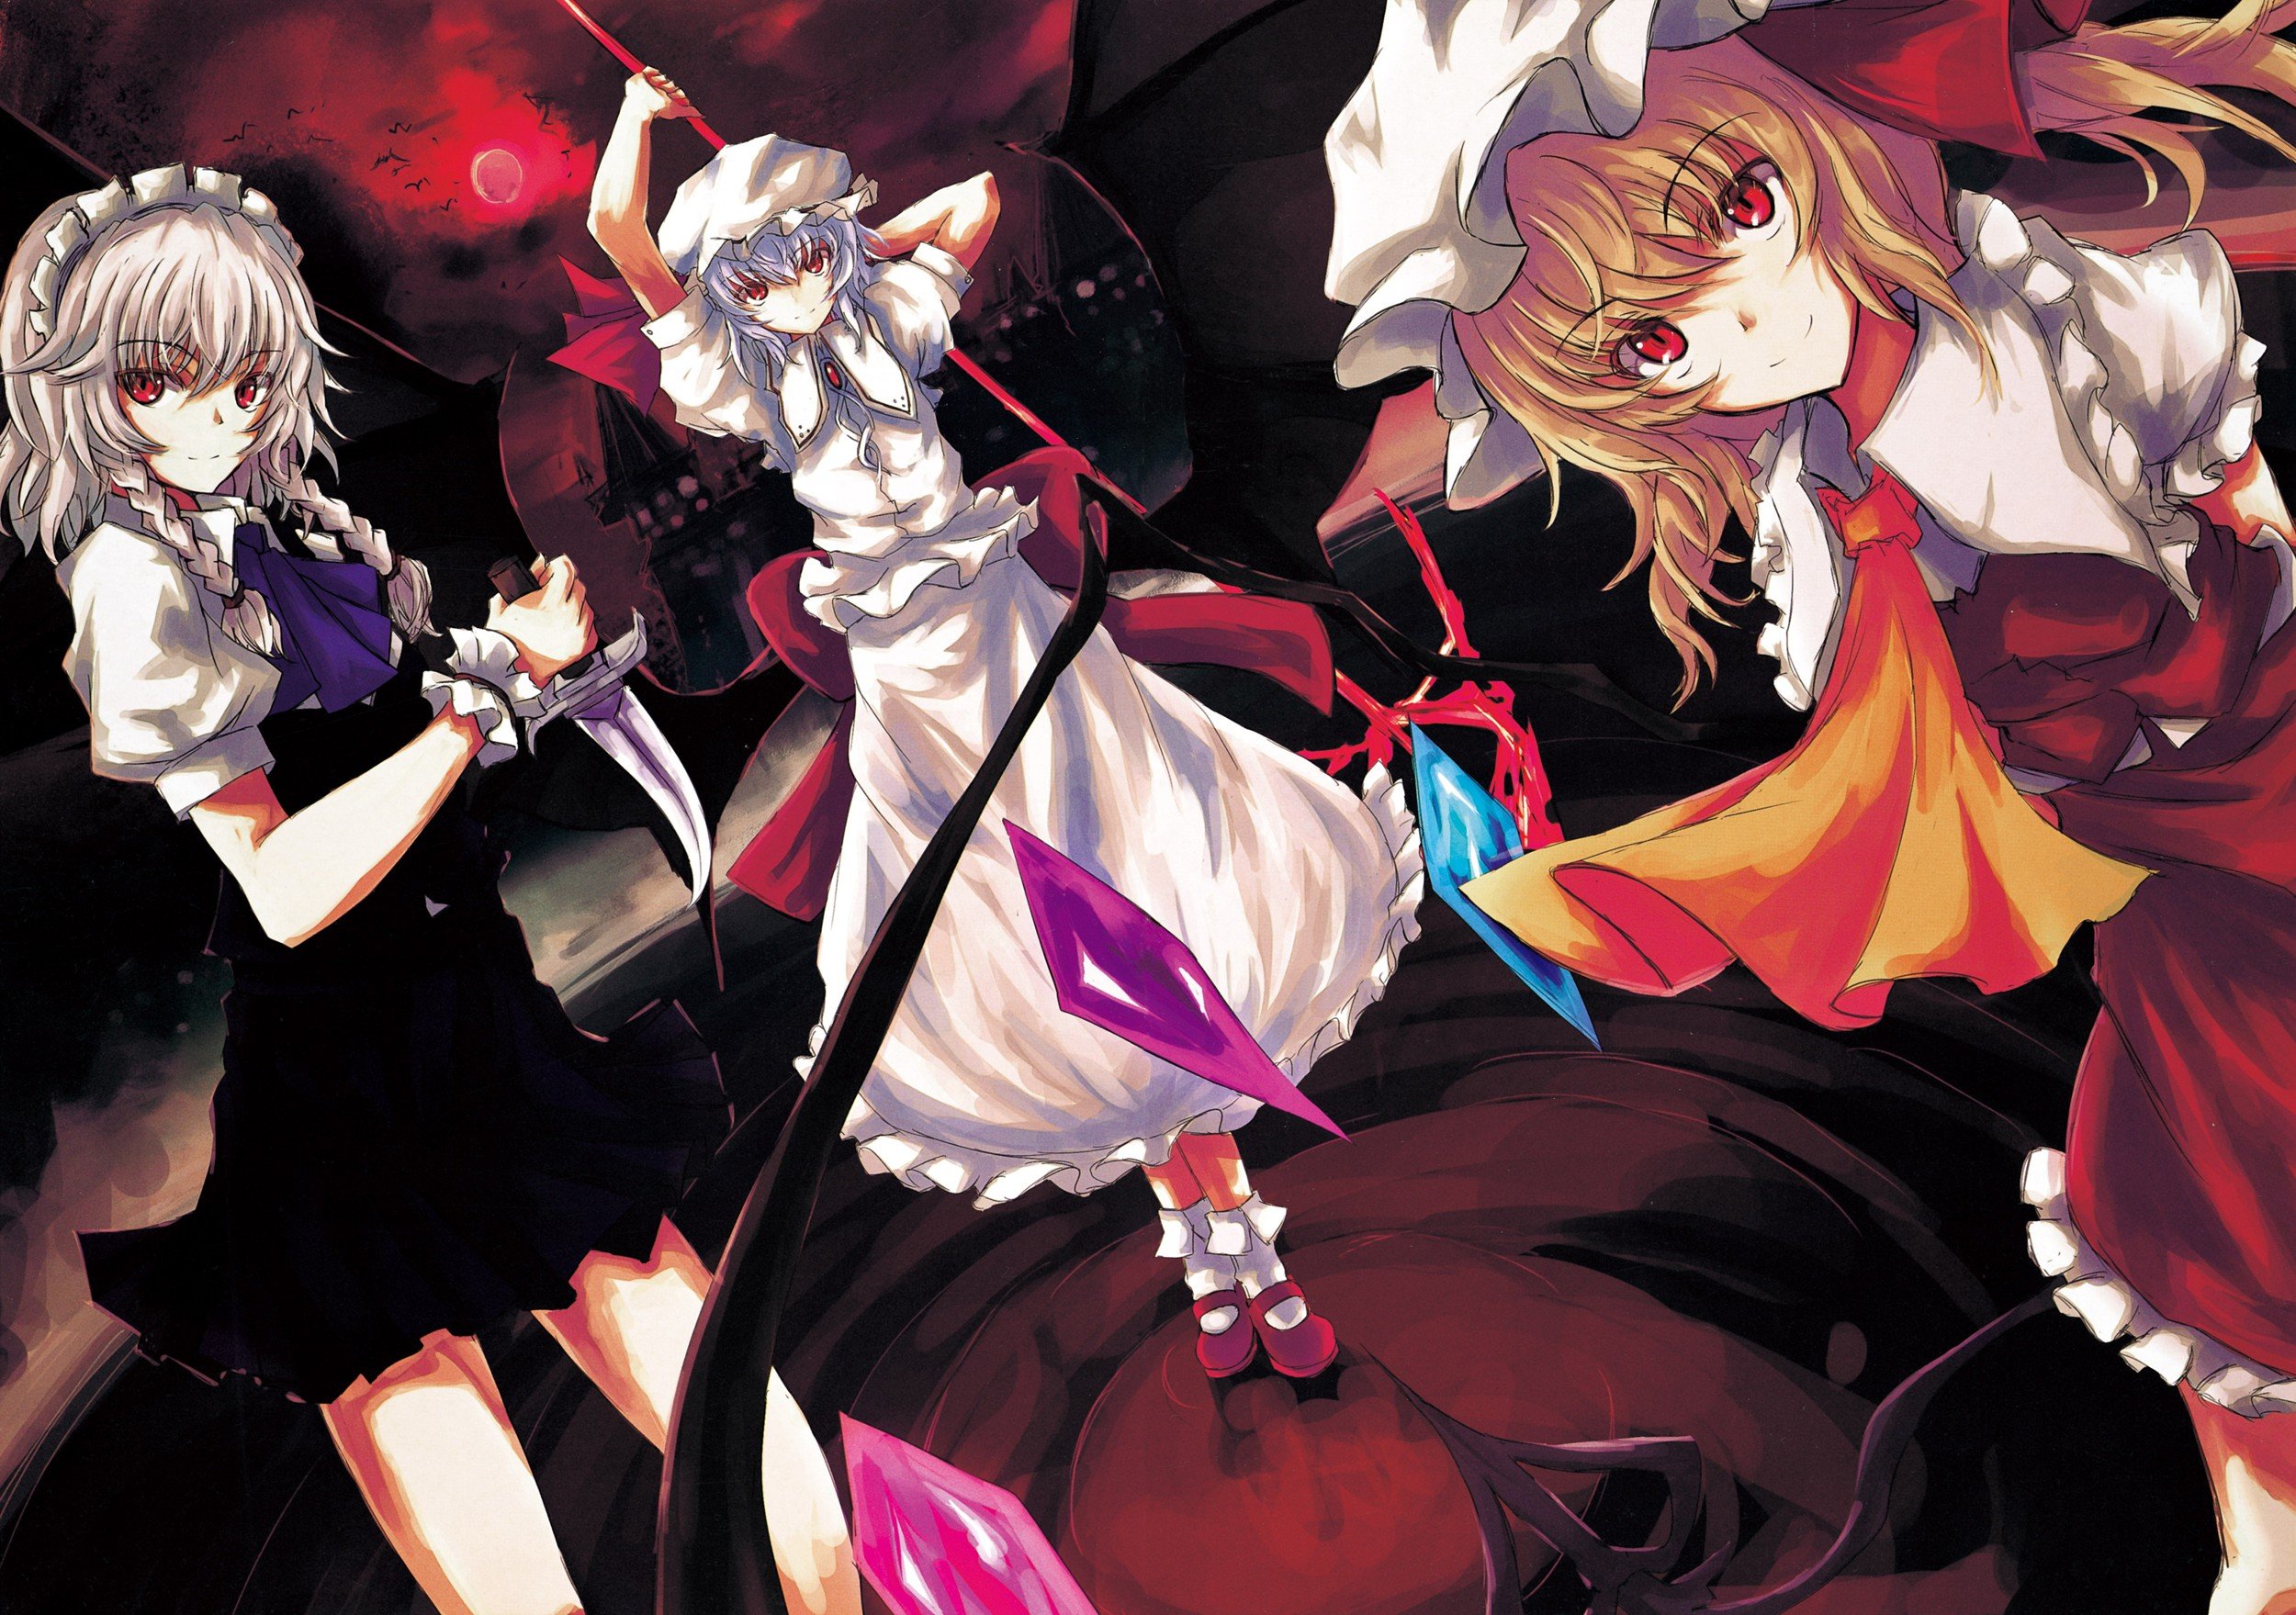 blondes, Video, Games, Touhou, Wings, Castles, Dress, Birds, Maids, Moon, Weapons, Socks, Izayoi, Sakuya, Blue, Hair, Shoes, Vampires, Red, Eyes, Short, Hair, Smiling, Knives, Flandre, Scarlet, Maid, Costumes, H Wallpaper